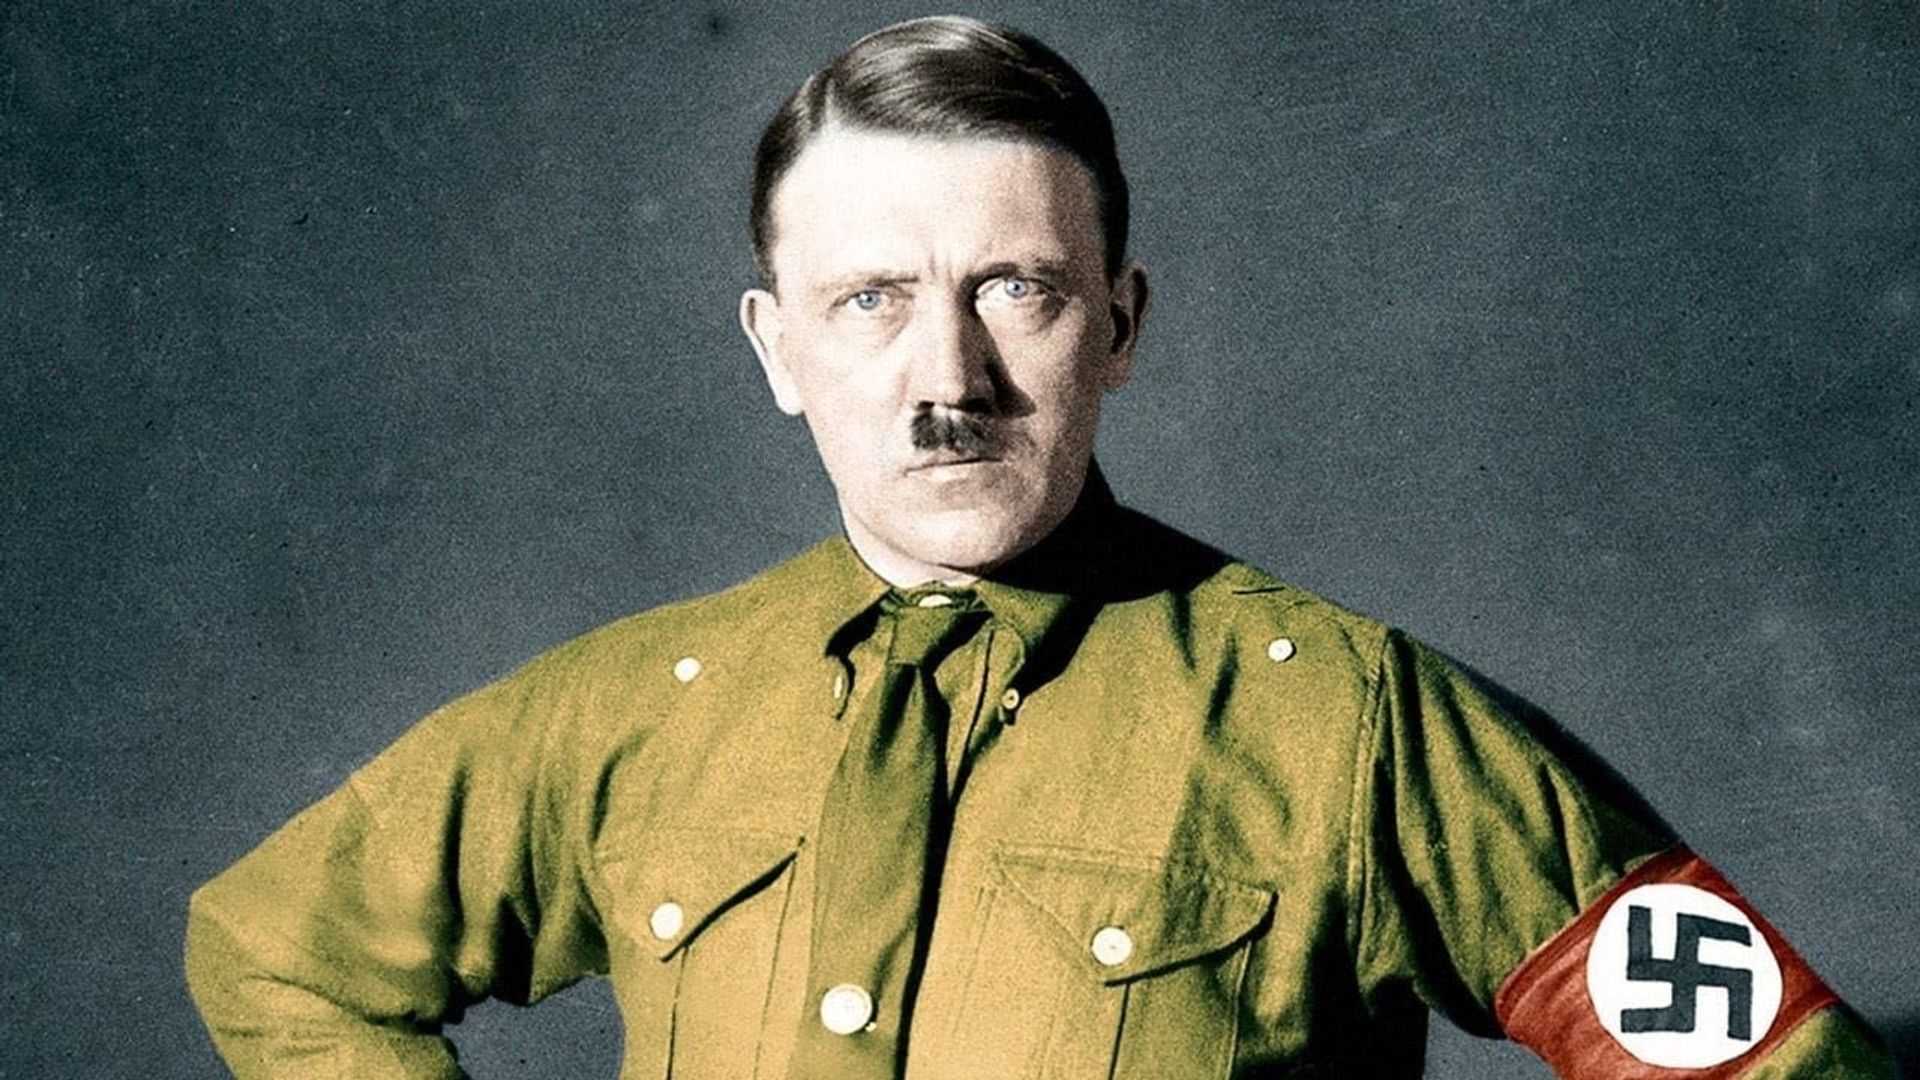 Hitler in Colour background